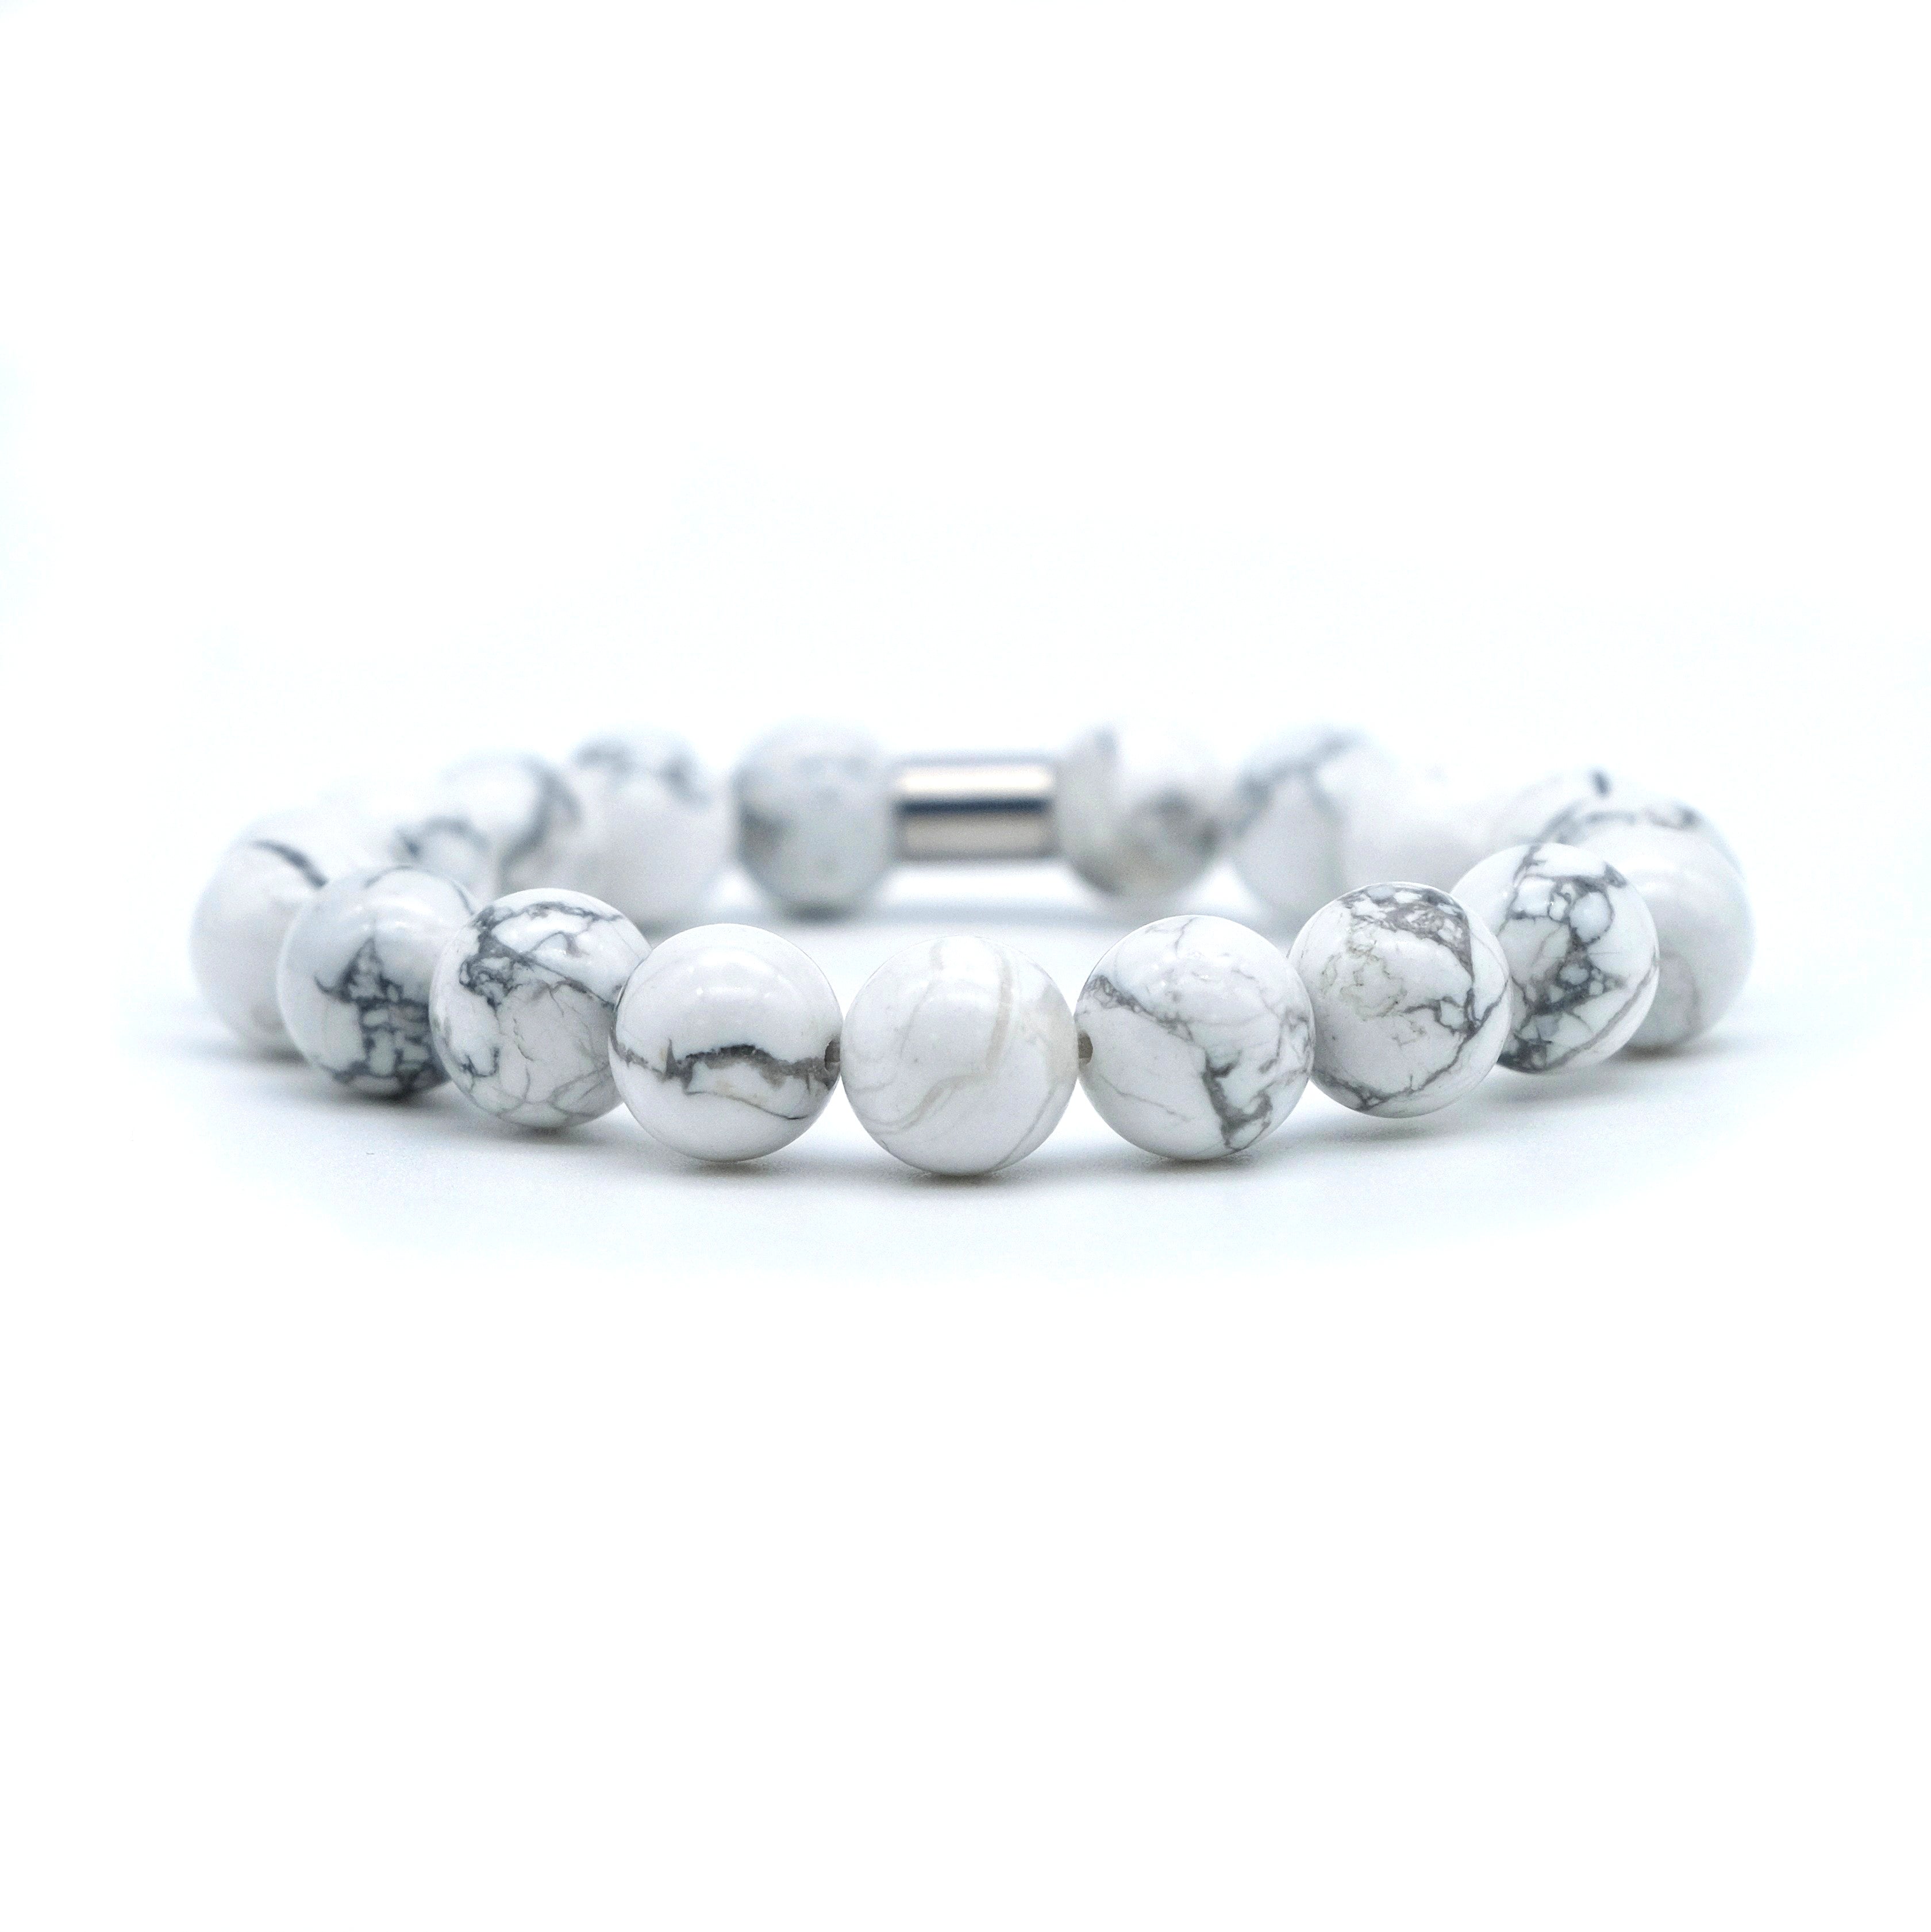 howlite gemstone bracelet in 10mm beads with stainless steel accessory